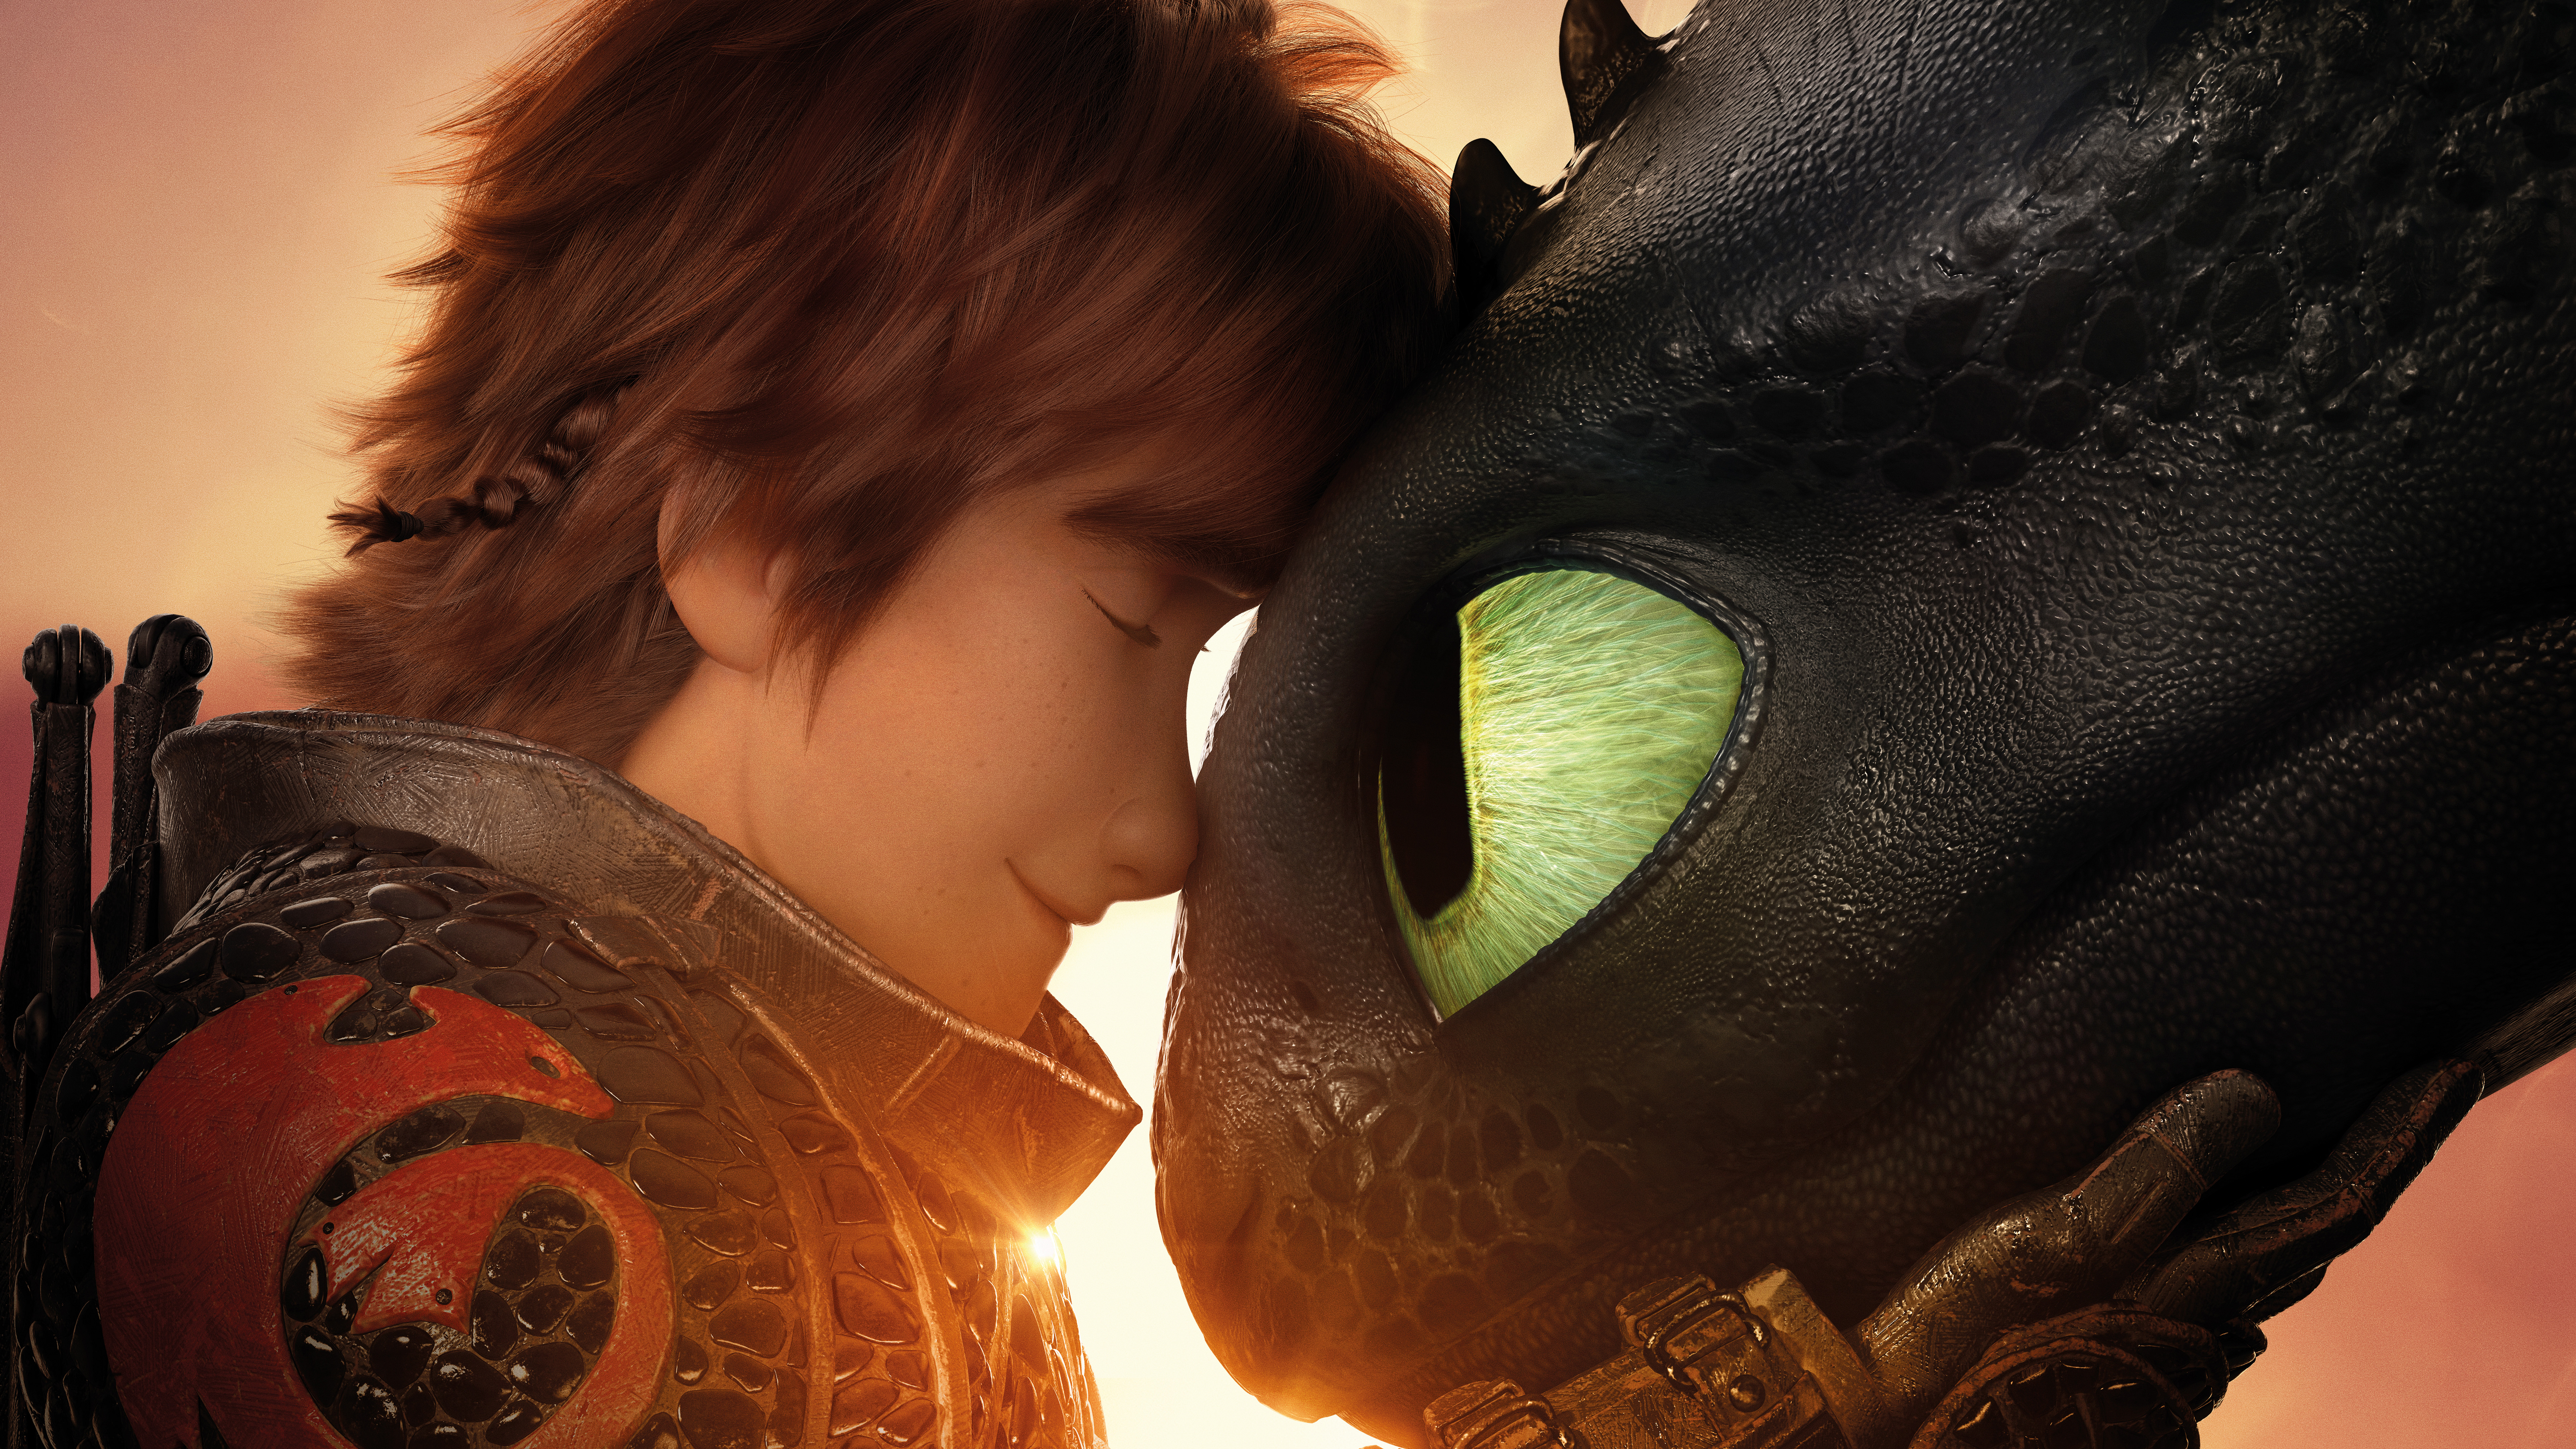 How To Train Your Dragon The Hidden World 4K 8K Wallpapers